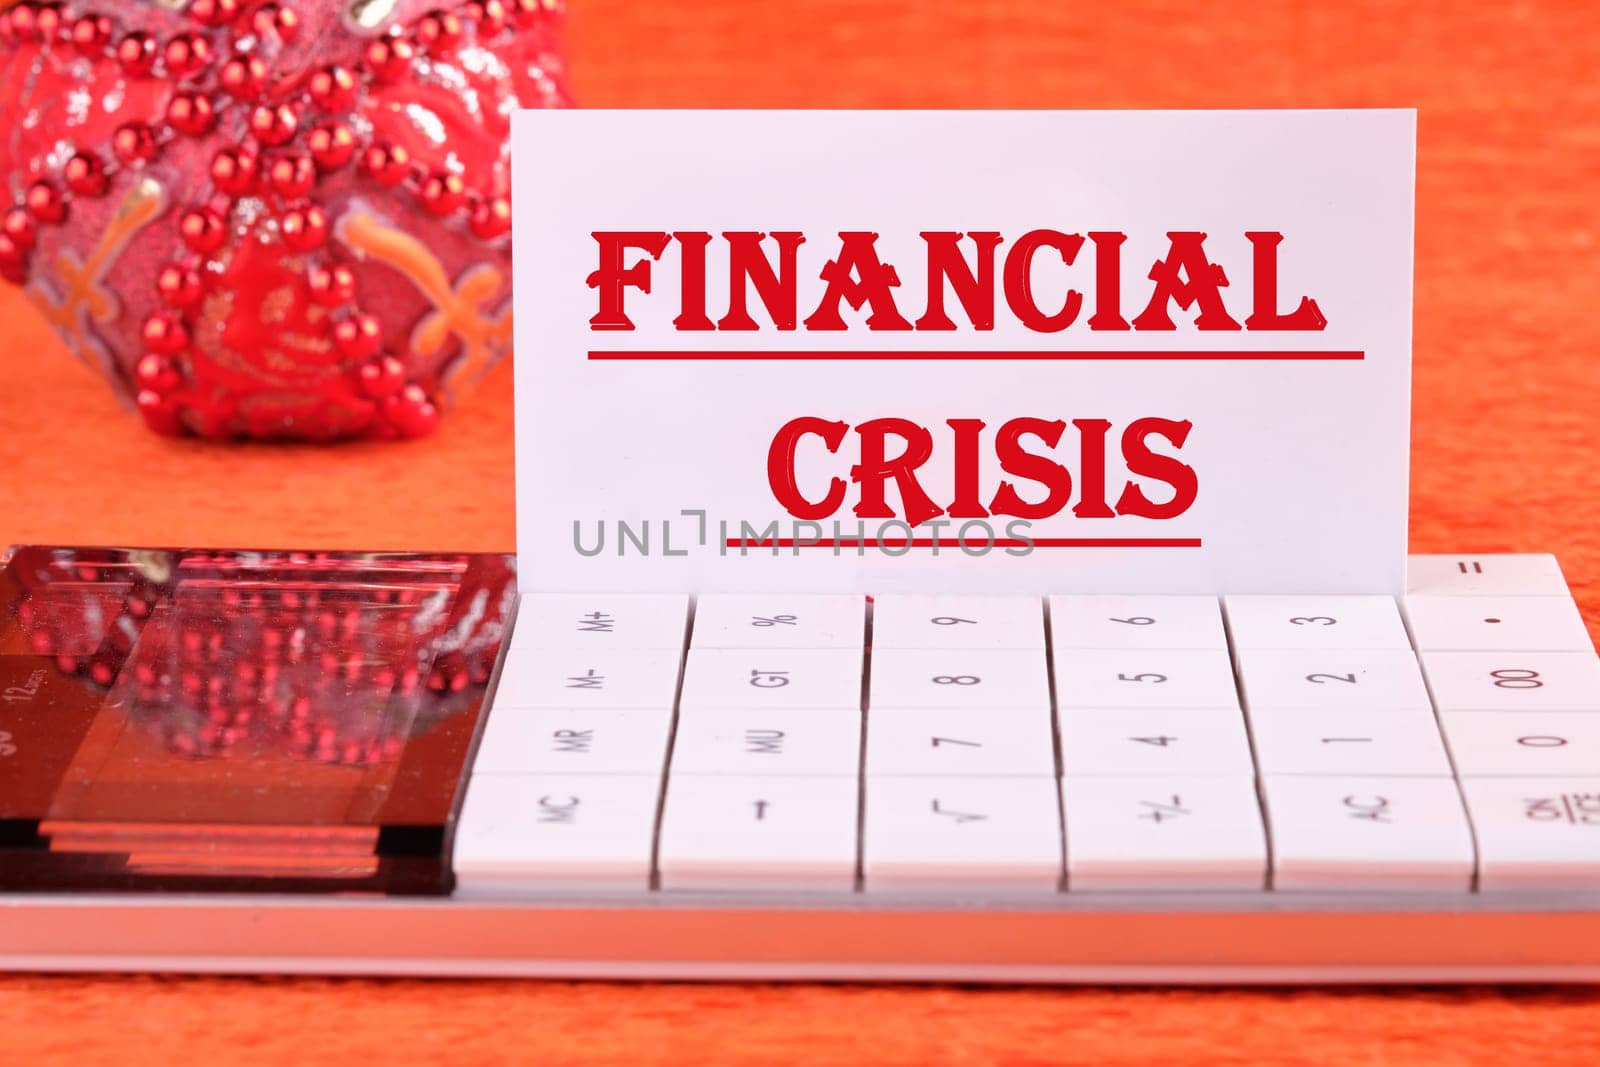 FINANCIAL CRISIS text written on a white business card on a calculator on an orange background by Ihar